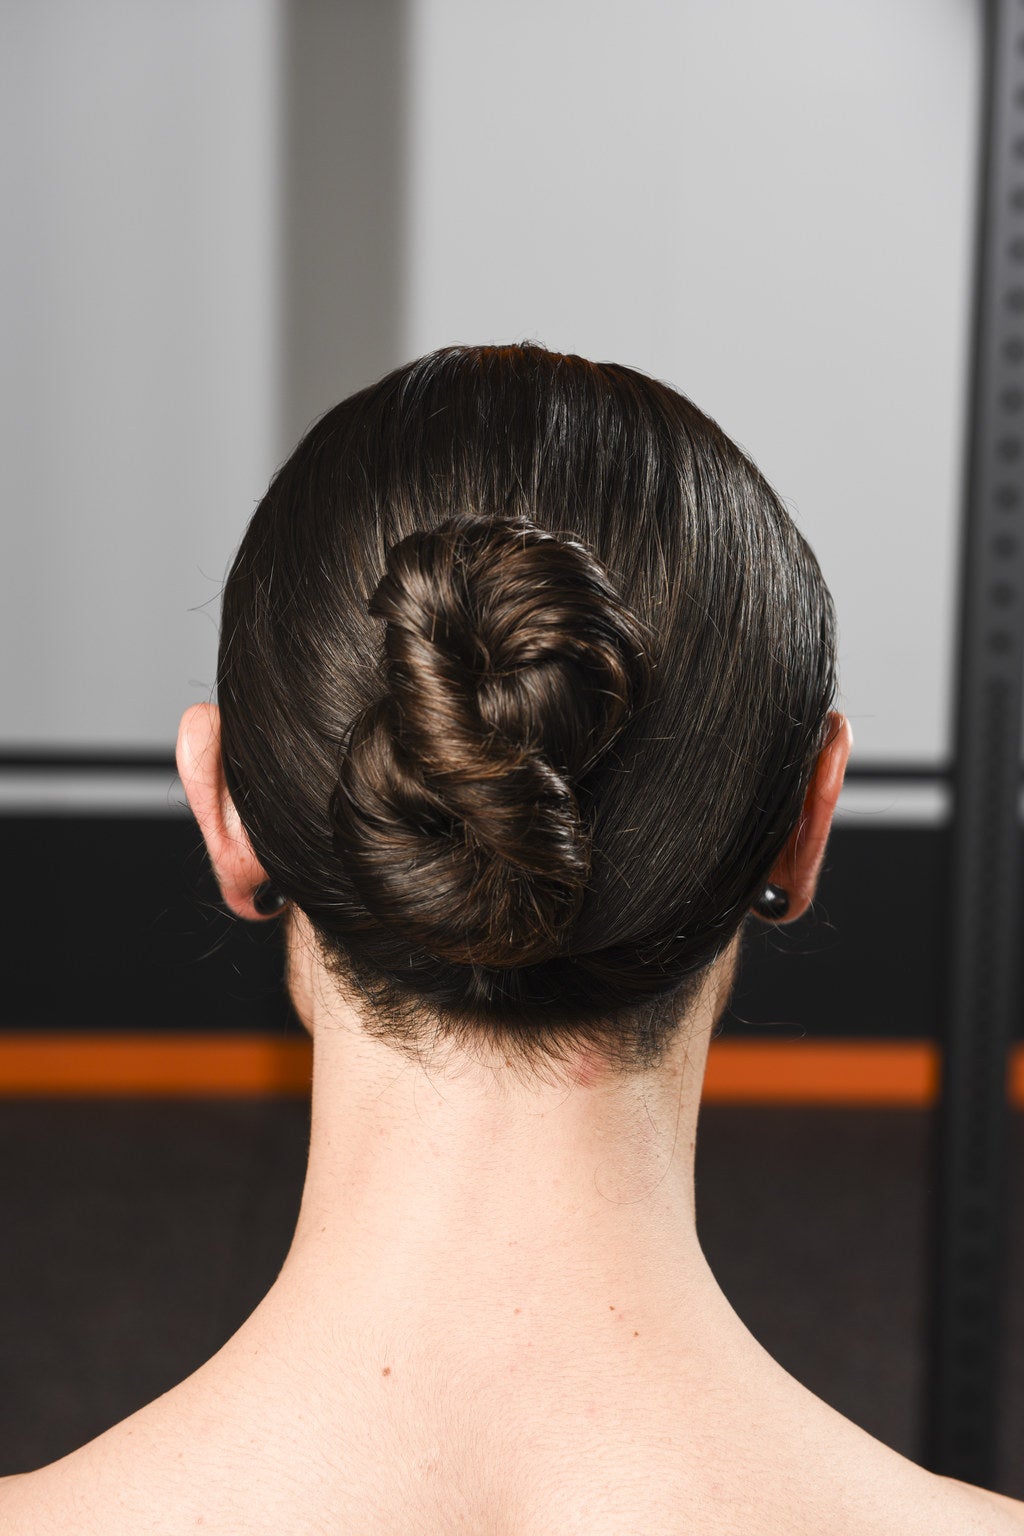 Try This Cool Figure-8 Bun When Your Hair Is Dripping Wet